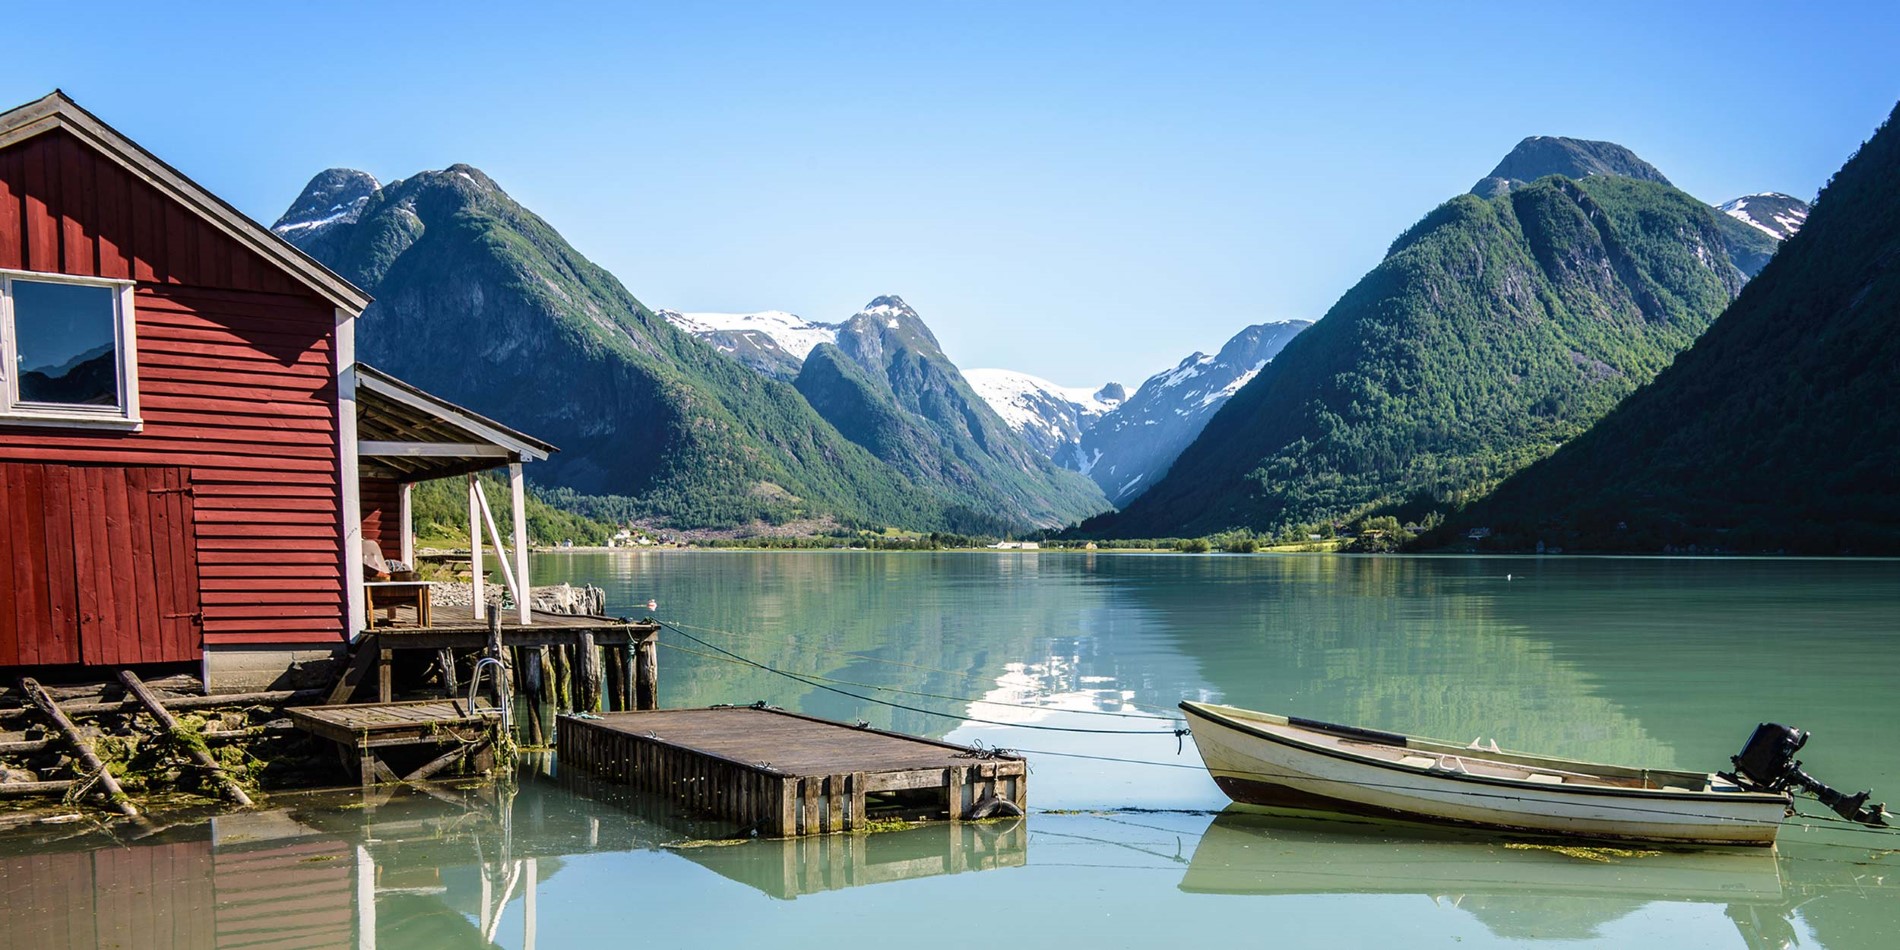 Sognefjord, the spectacular longest and deepest fjord in Norway